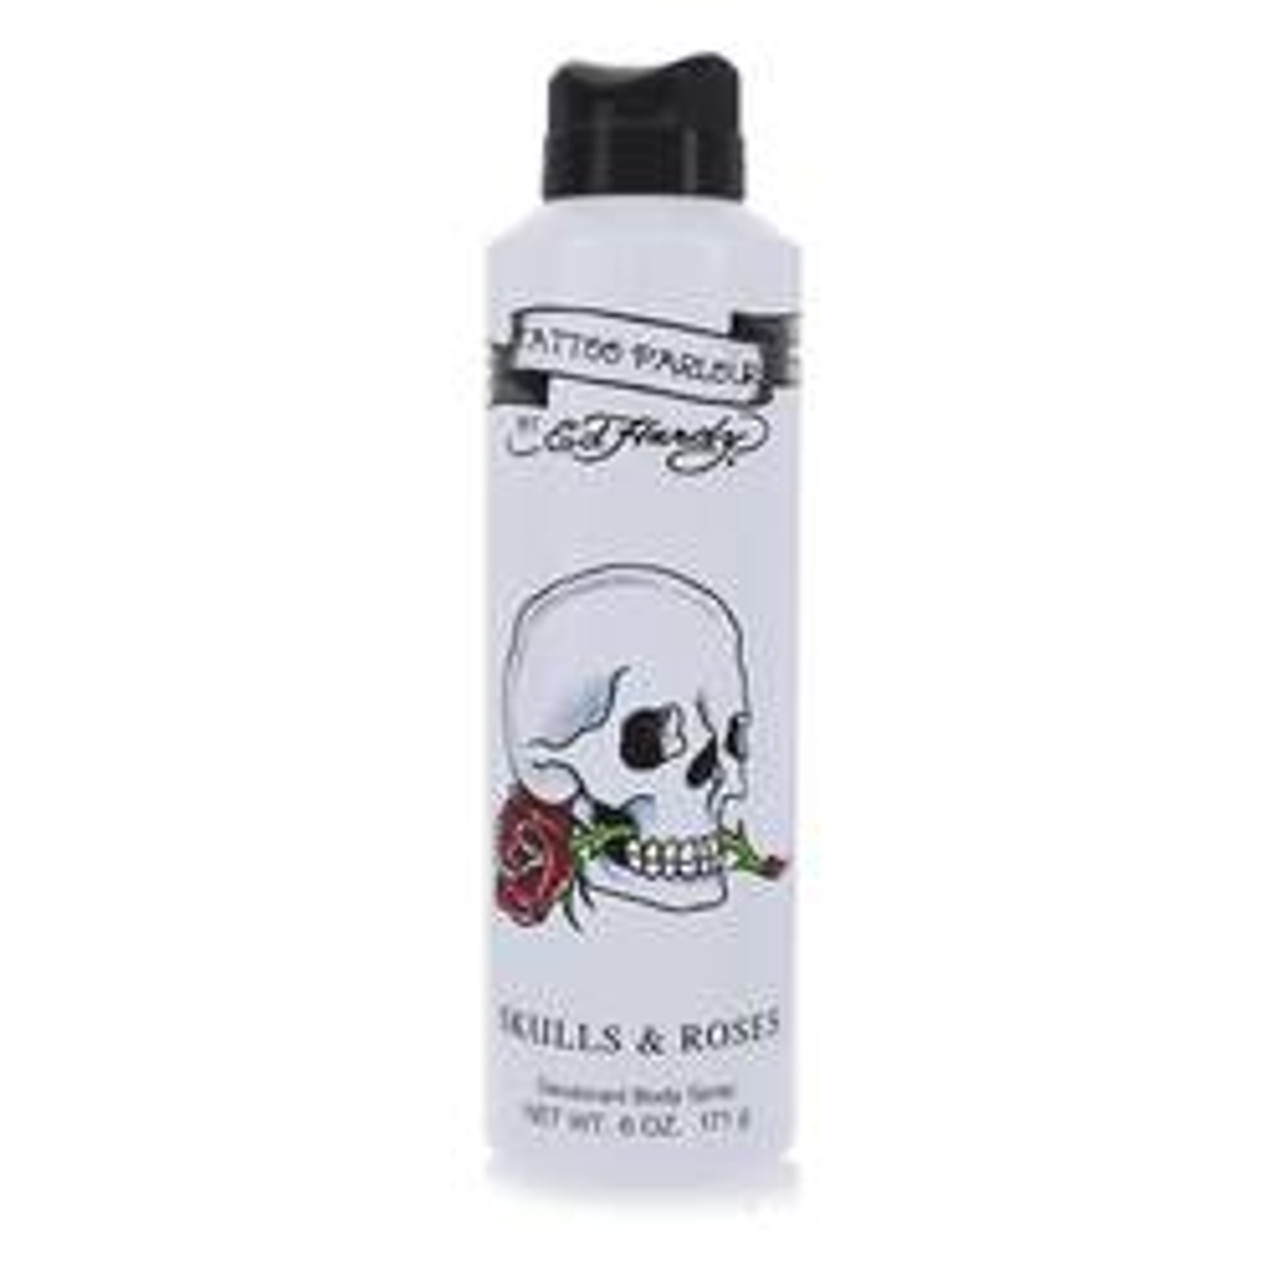 Skulls & Roses Cologne By Christian Audigier Deodorant Spray 6 oz for Men - [From 19.00 - Choose pk Qty ] - *Ships from Miami